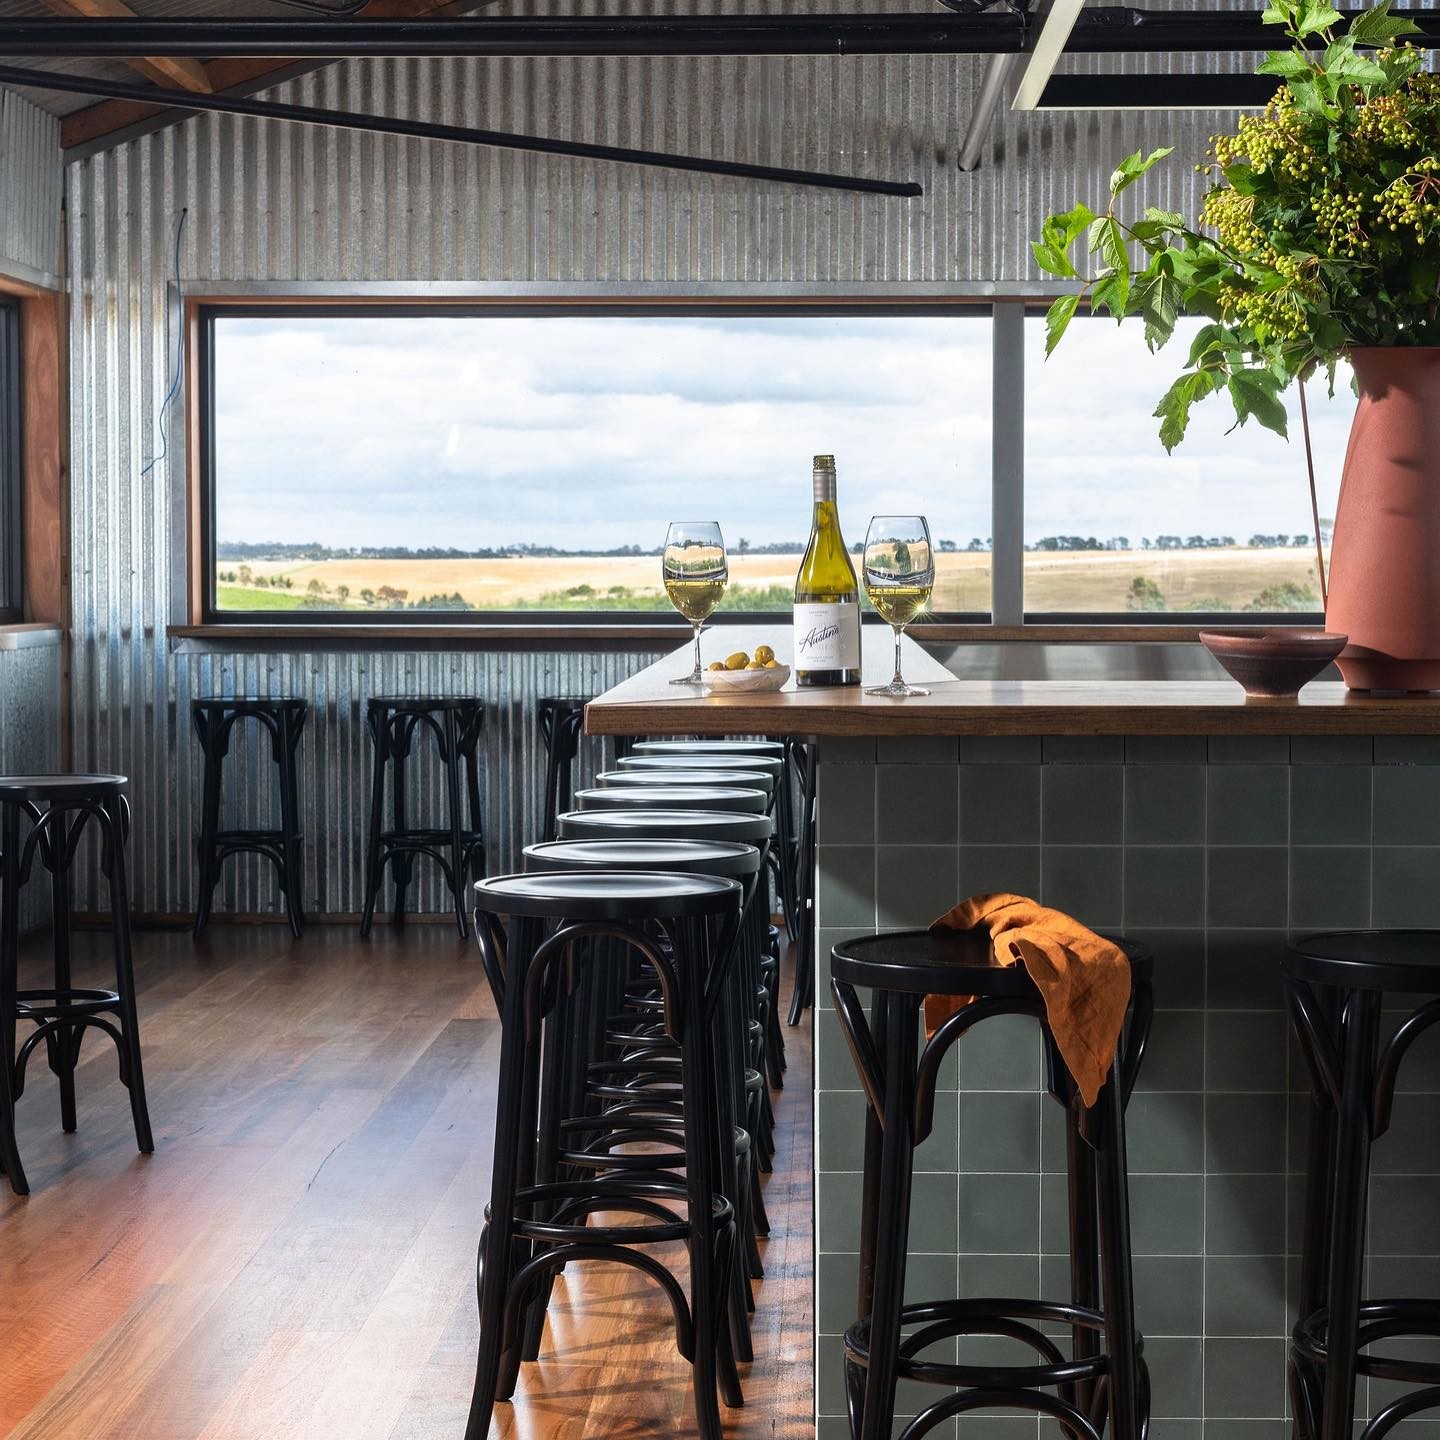 Inside a cellar door. Barstools line a blue tiled bar and the far wall below the window, which overlooks stunning rural views.